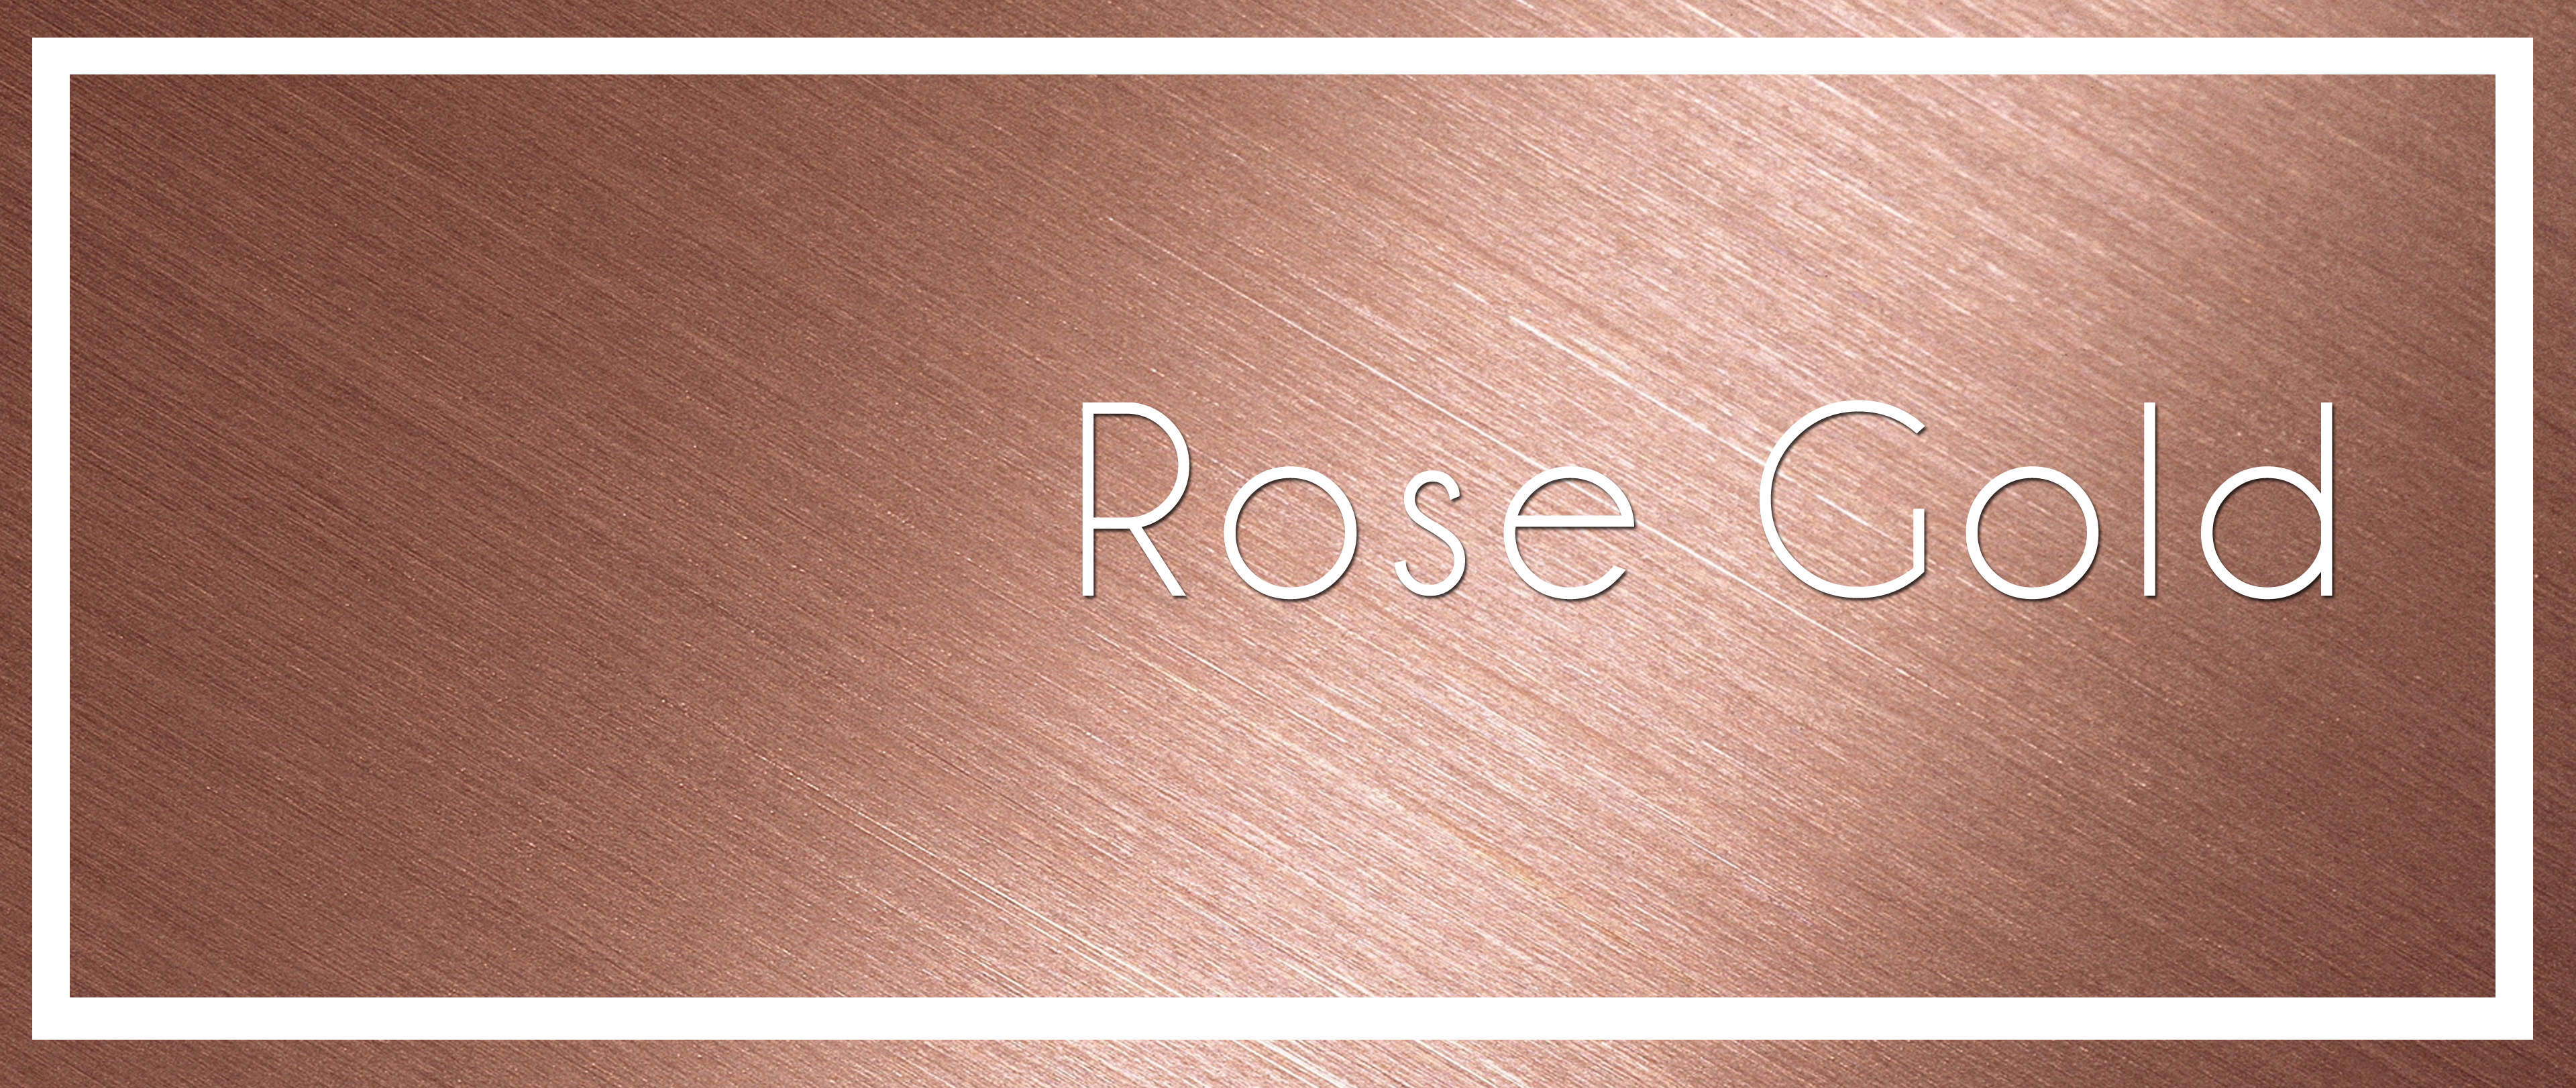 Metal texture pink gold gold and rose gold gradients metalic rose gold ...